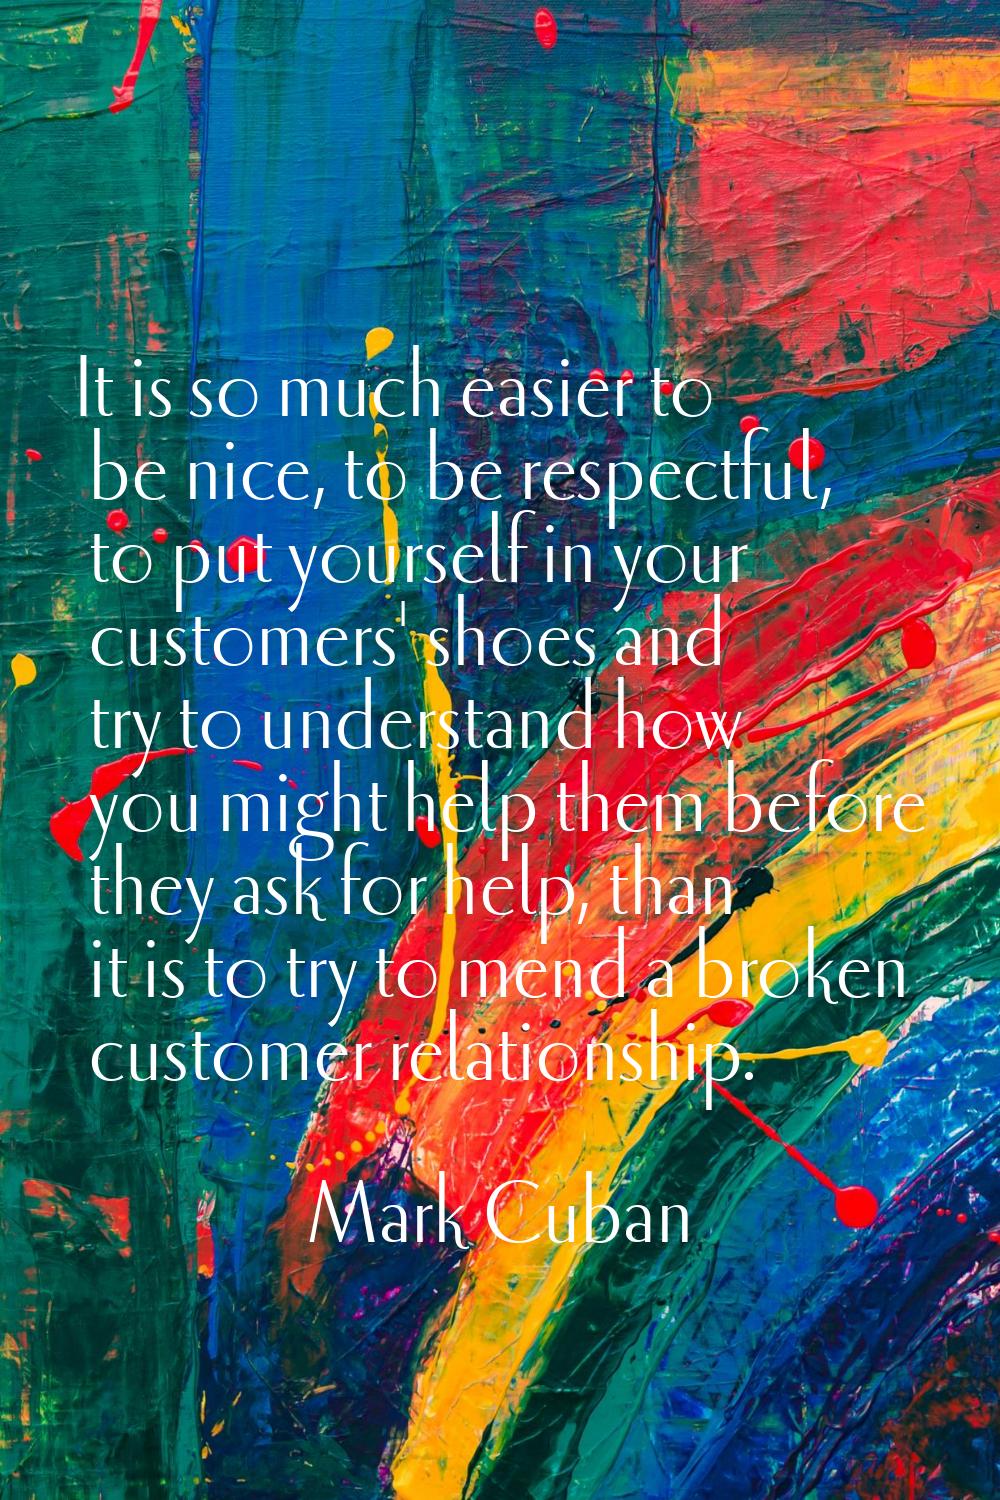 It is so much easier to be nice, to be respectful, to put yourself in your customers' shoes and try